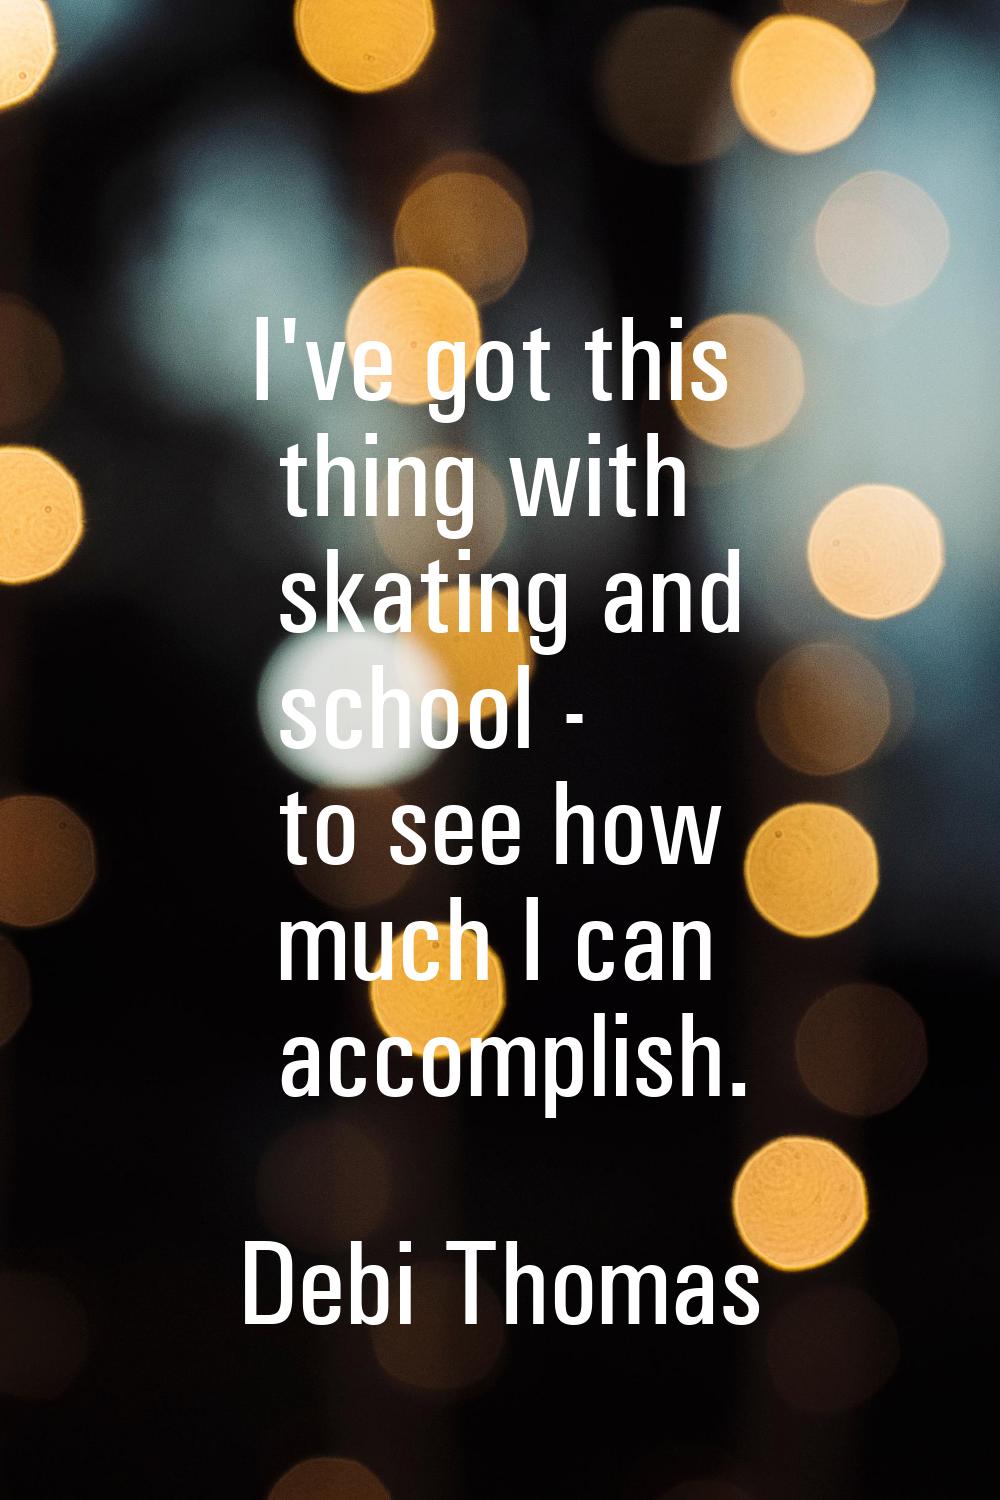 I've got this thing with skating and school - to see how much I can accomplish.